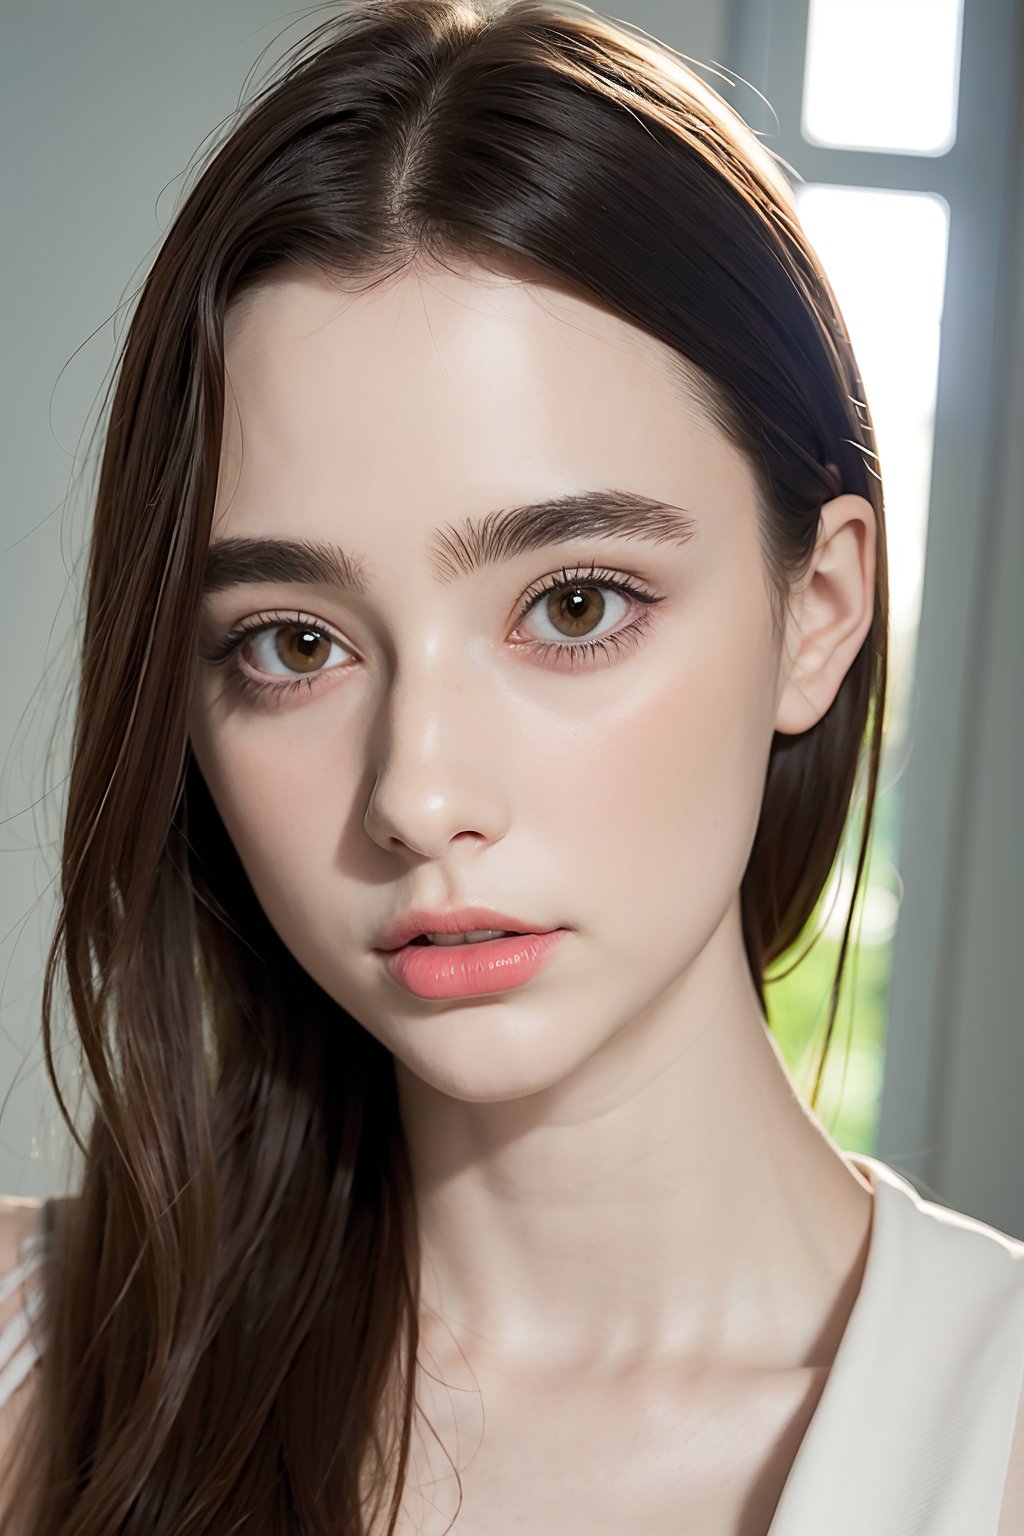 <lora:InsgirlTara_v10:0.8>, 1girl, wearing clothes, cute, realistic, portrait, solo, looking_at_viewer, lips, brown_eyes, pale skin, realistic humid skin, extremely detailed face, extremely detailed eyes, v-shaped slim face